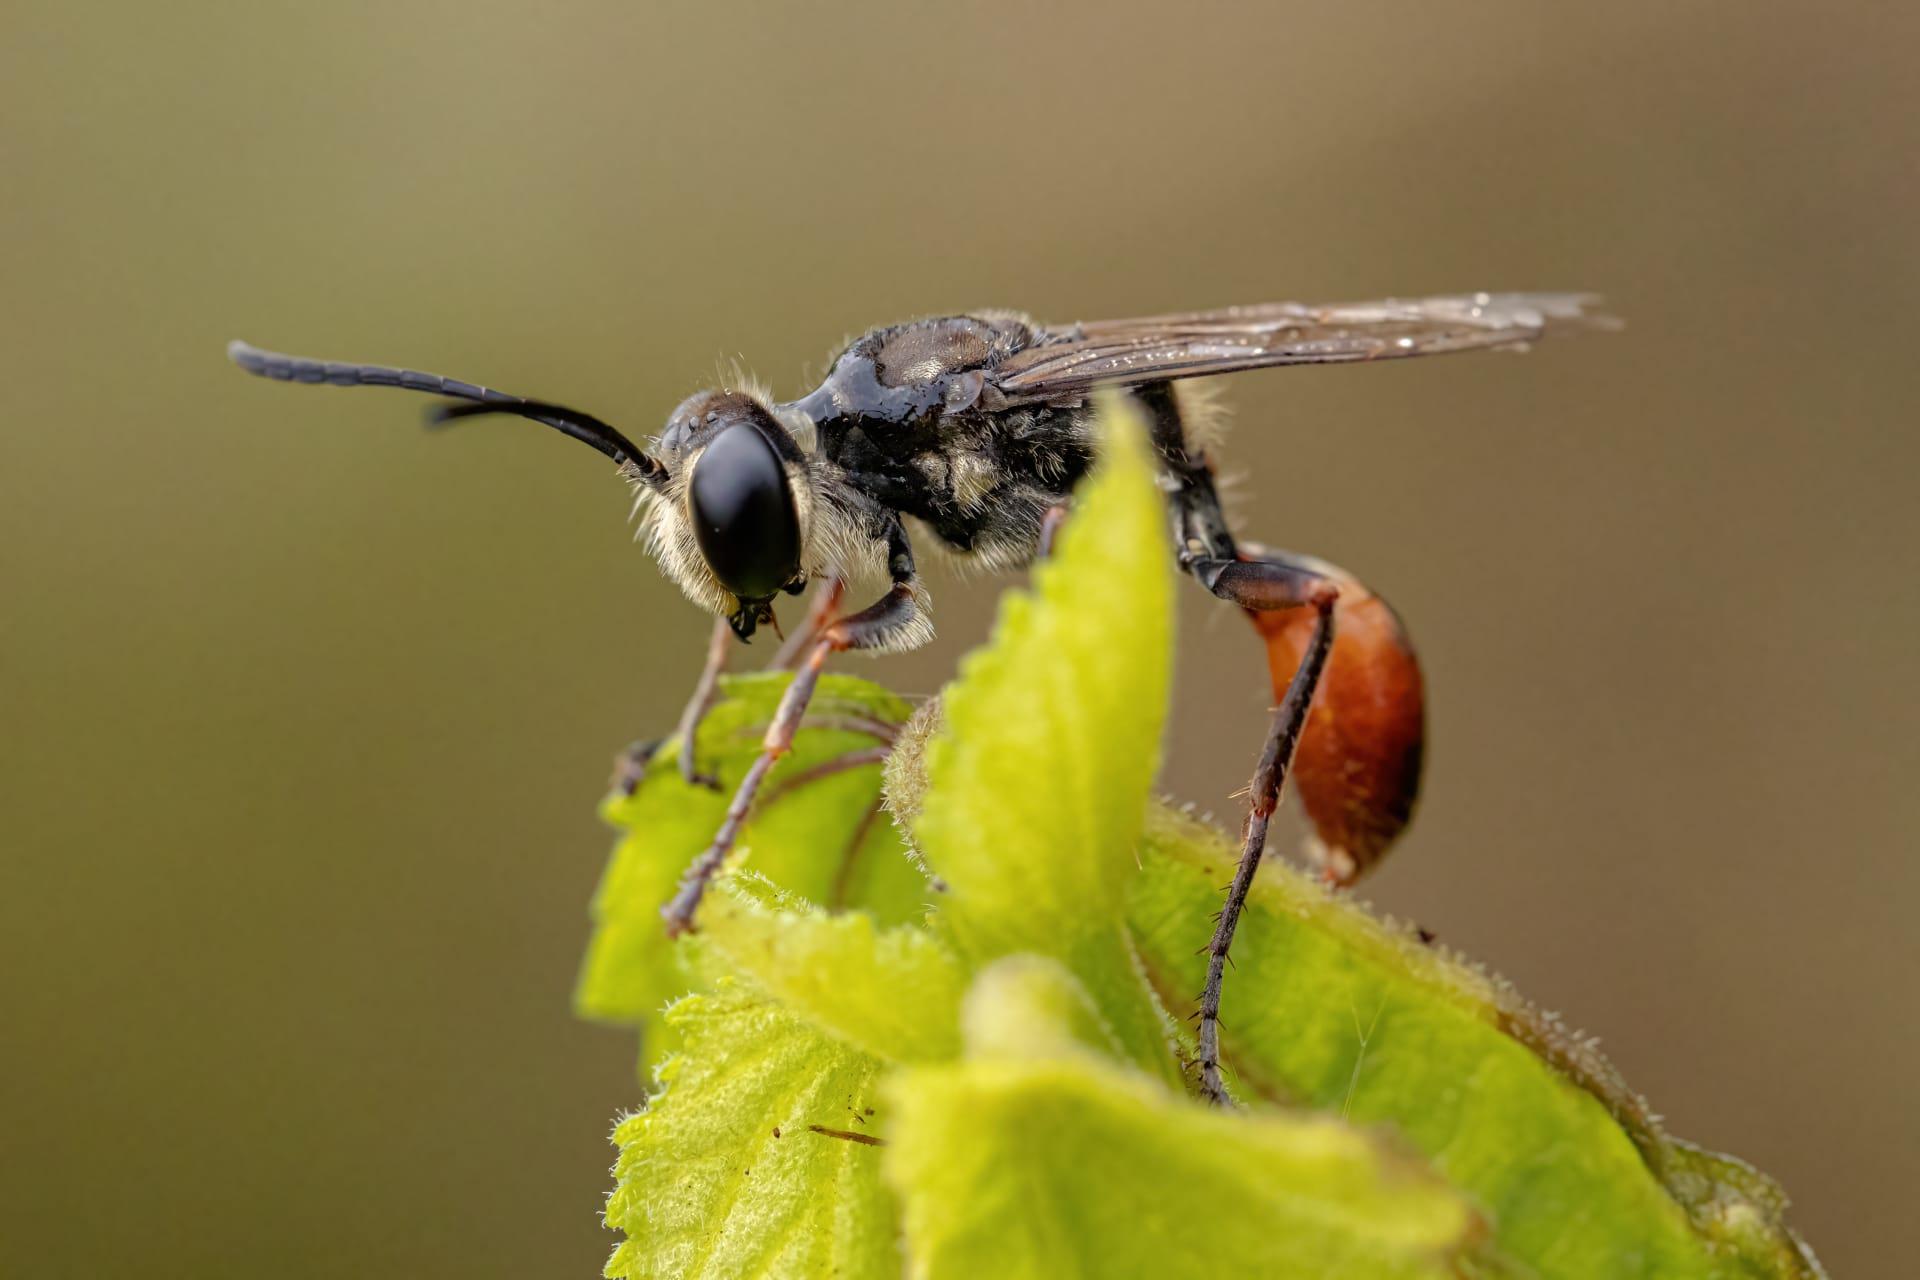 Parasitic wasp pictures